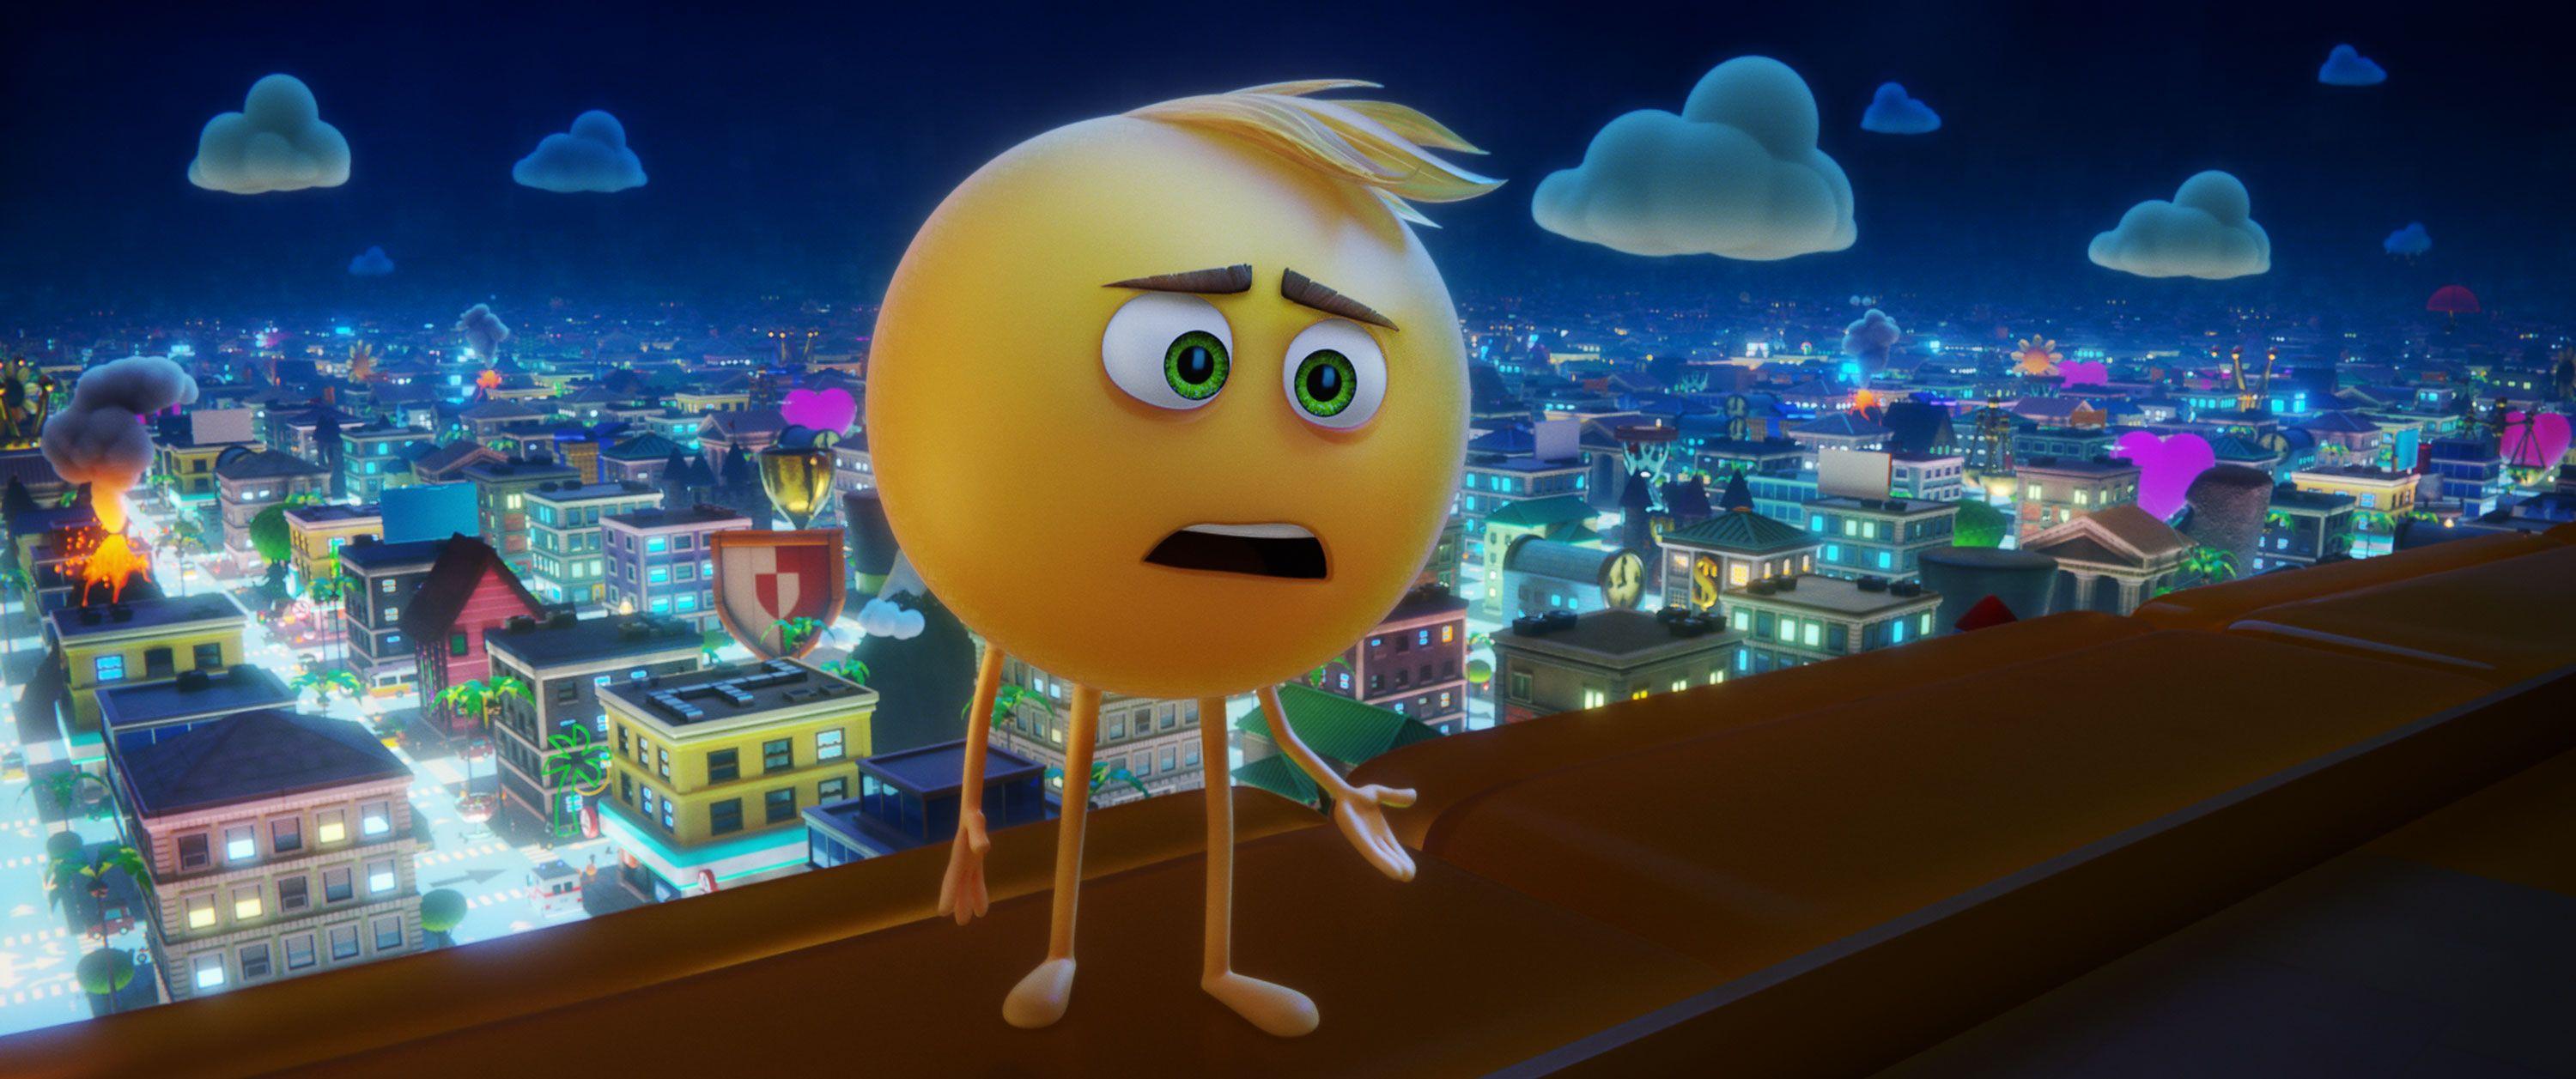 Inappropriate Bird Logo - 17 of the Most Disturbing Moments in 'The Emoji Movie'